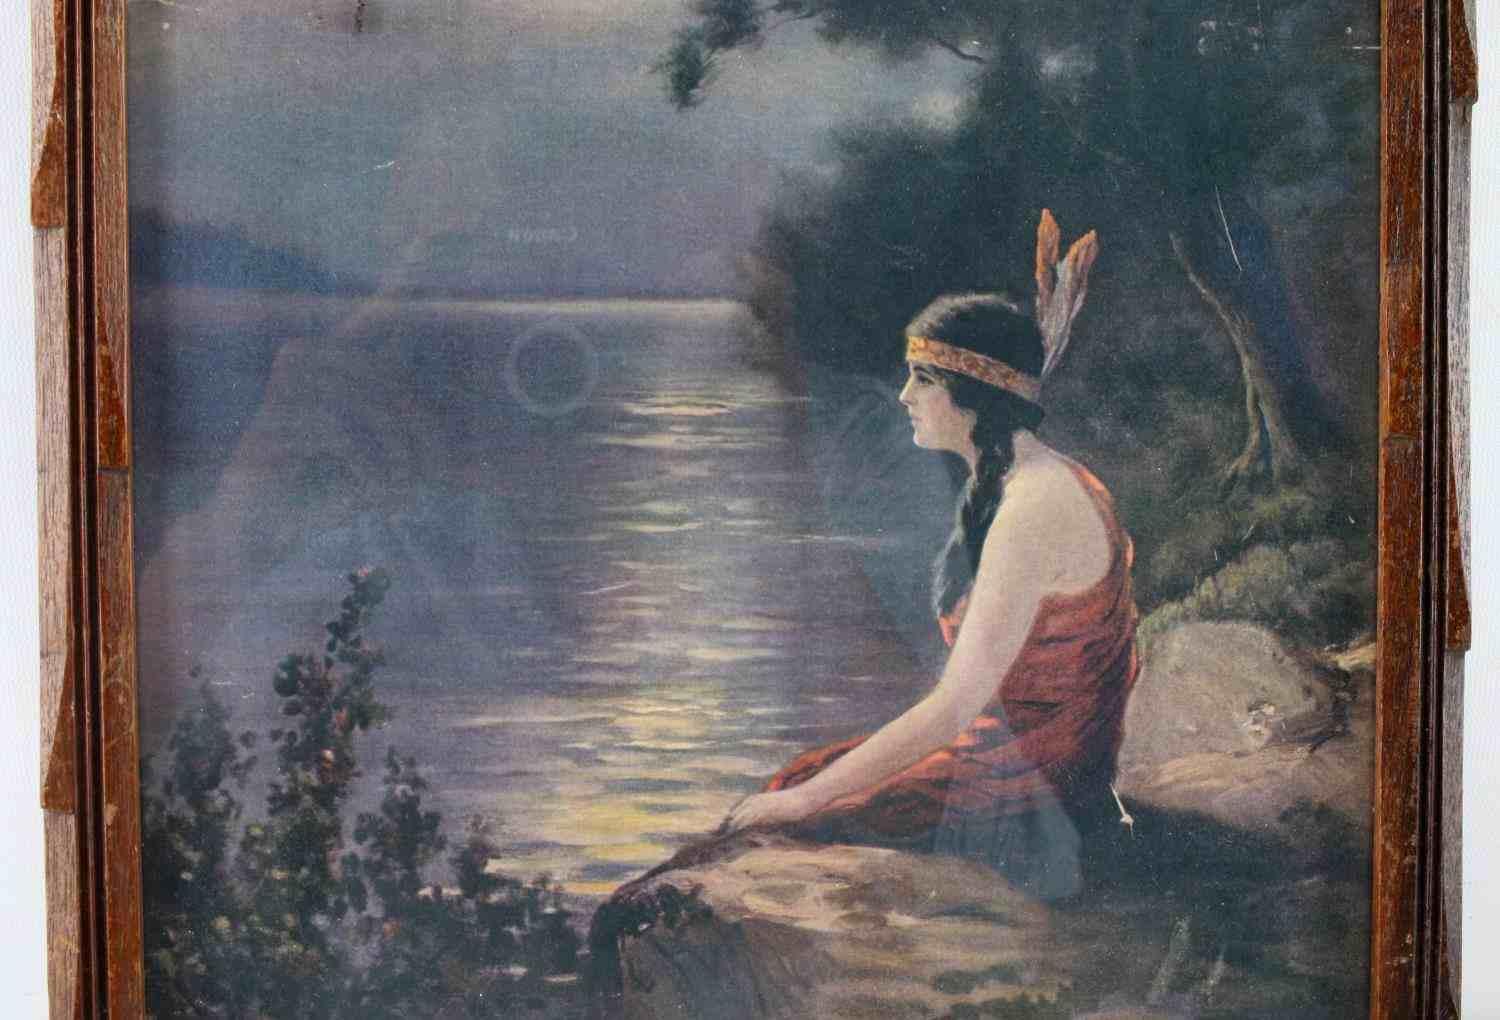 FRAMED PRINT OF NATIVE AMERICAN WOMAN WATERSCAPE